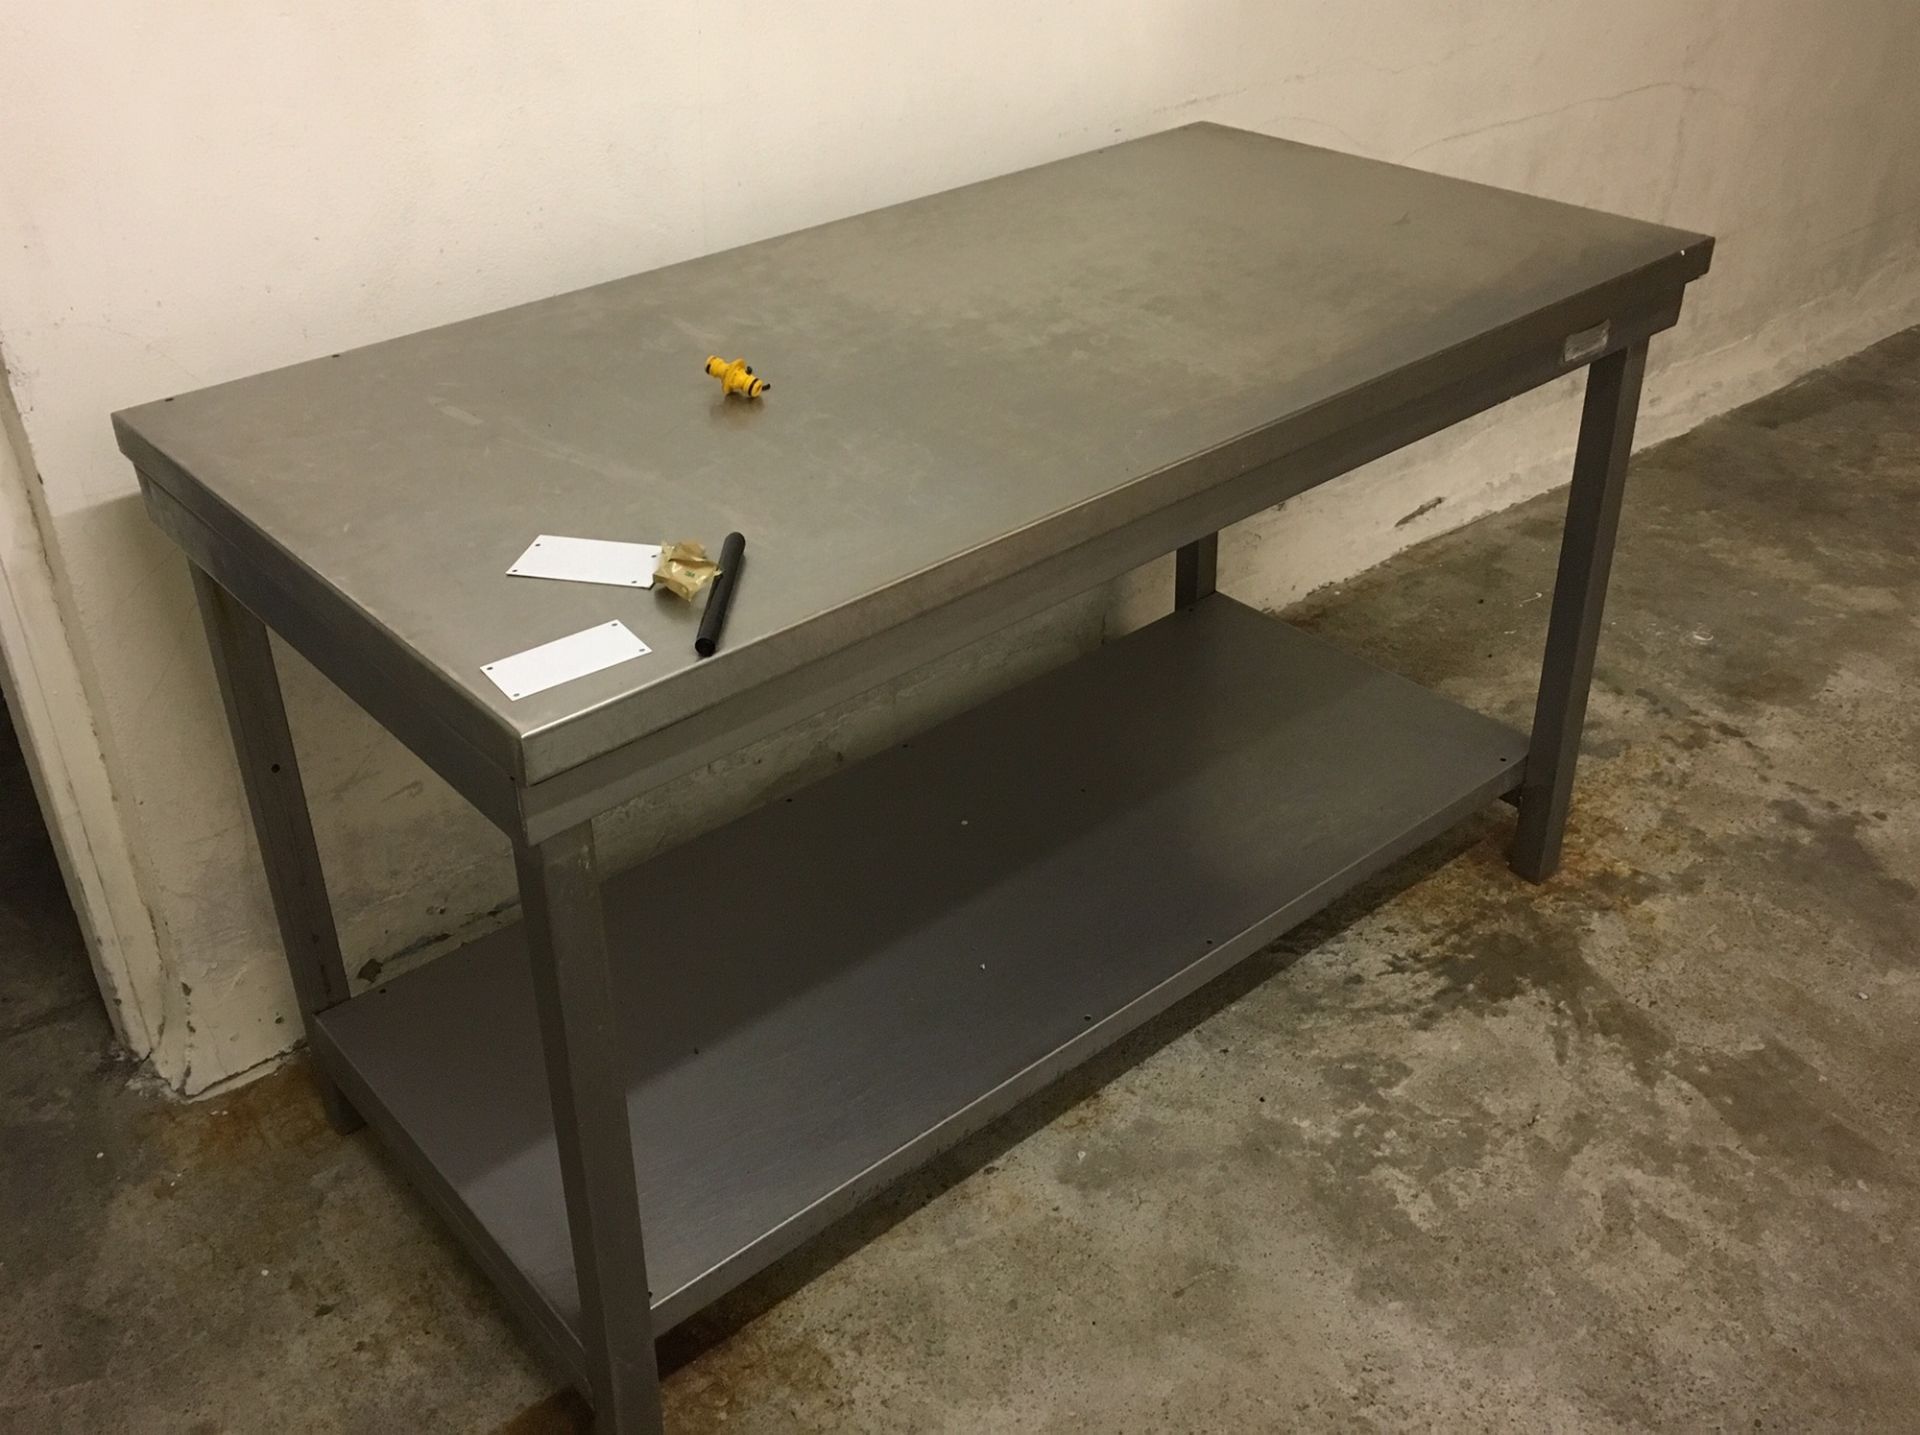 Stainless Steel Table 4 1/2" x 2 1/2".